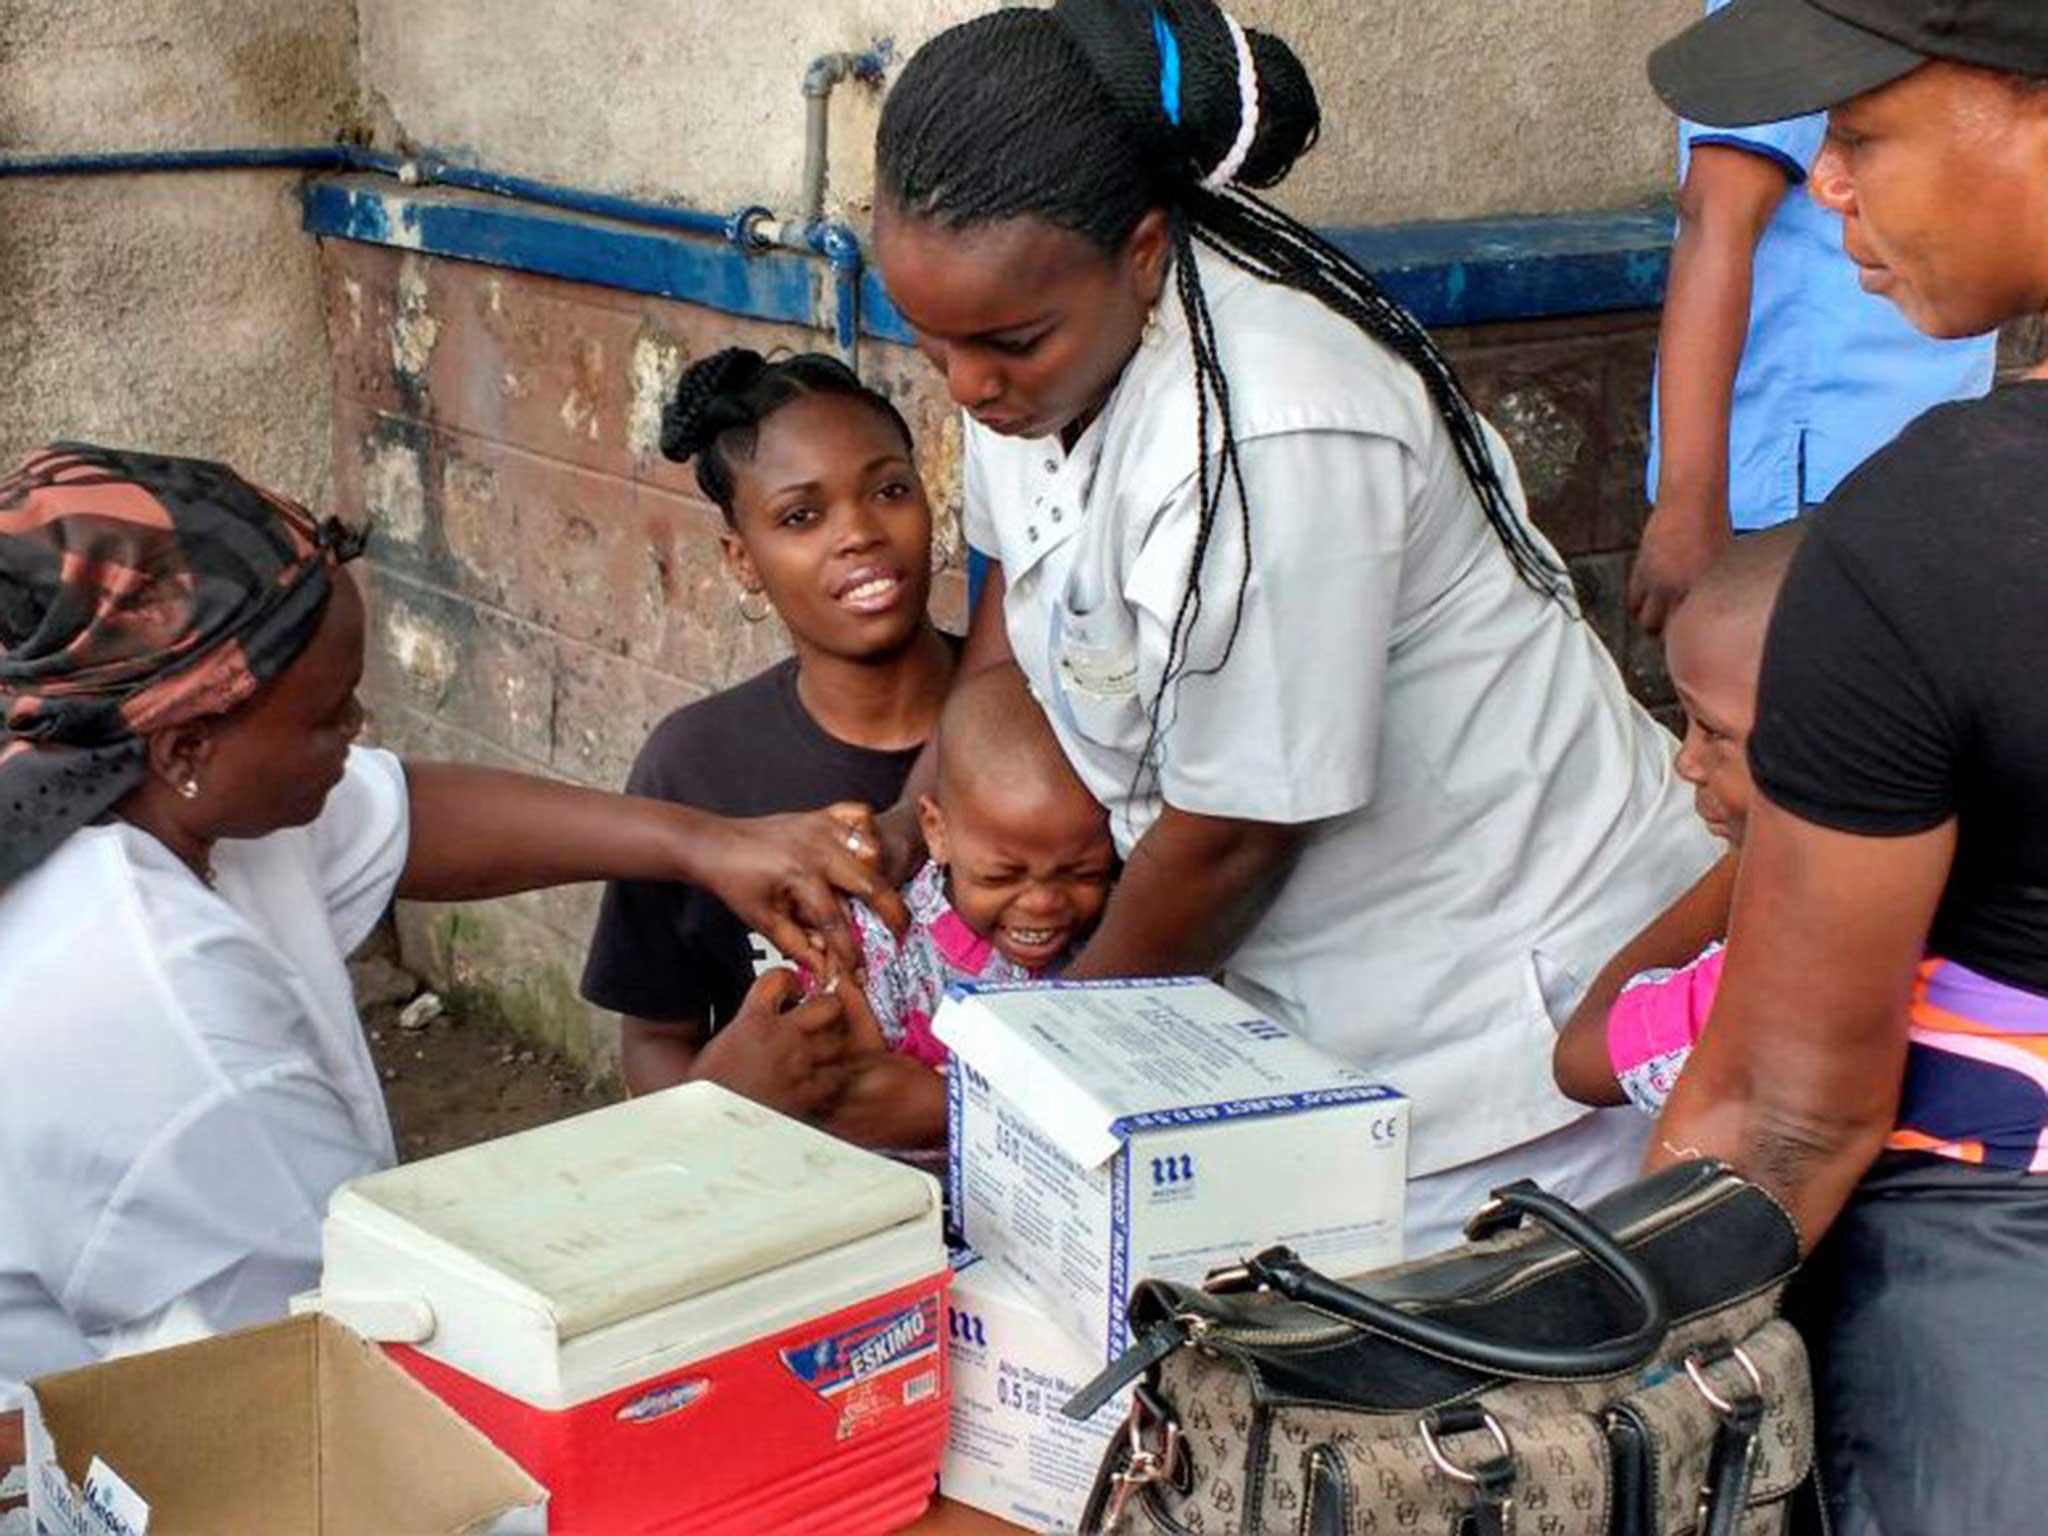 A Congolese child receives vaccination against yellow fever at the Kalembe-Lembe pediatric hospital, in Lingwala district of the Democratic Republic of Congo's capital Kinshasa